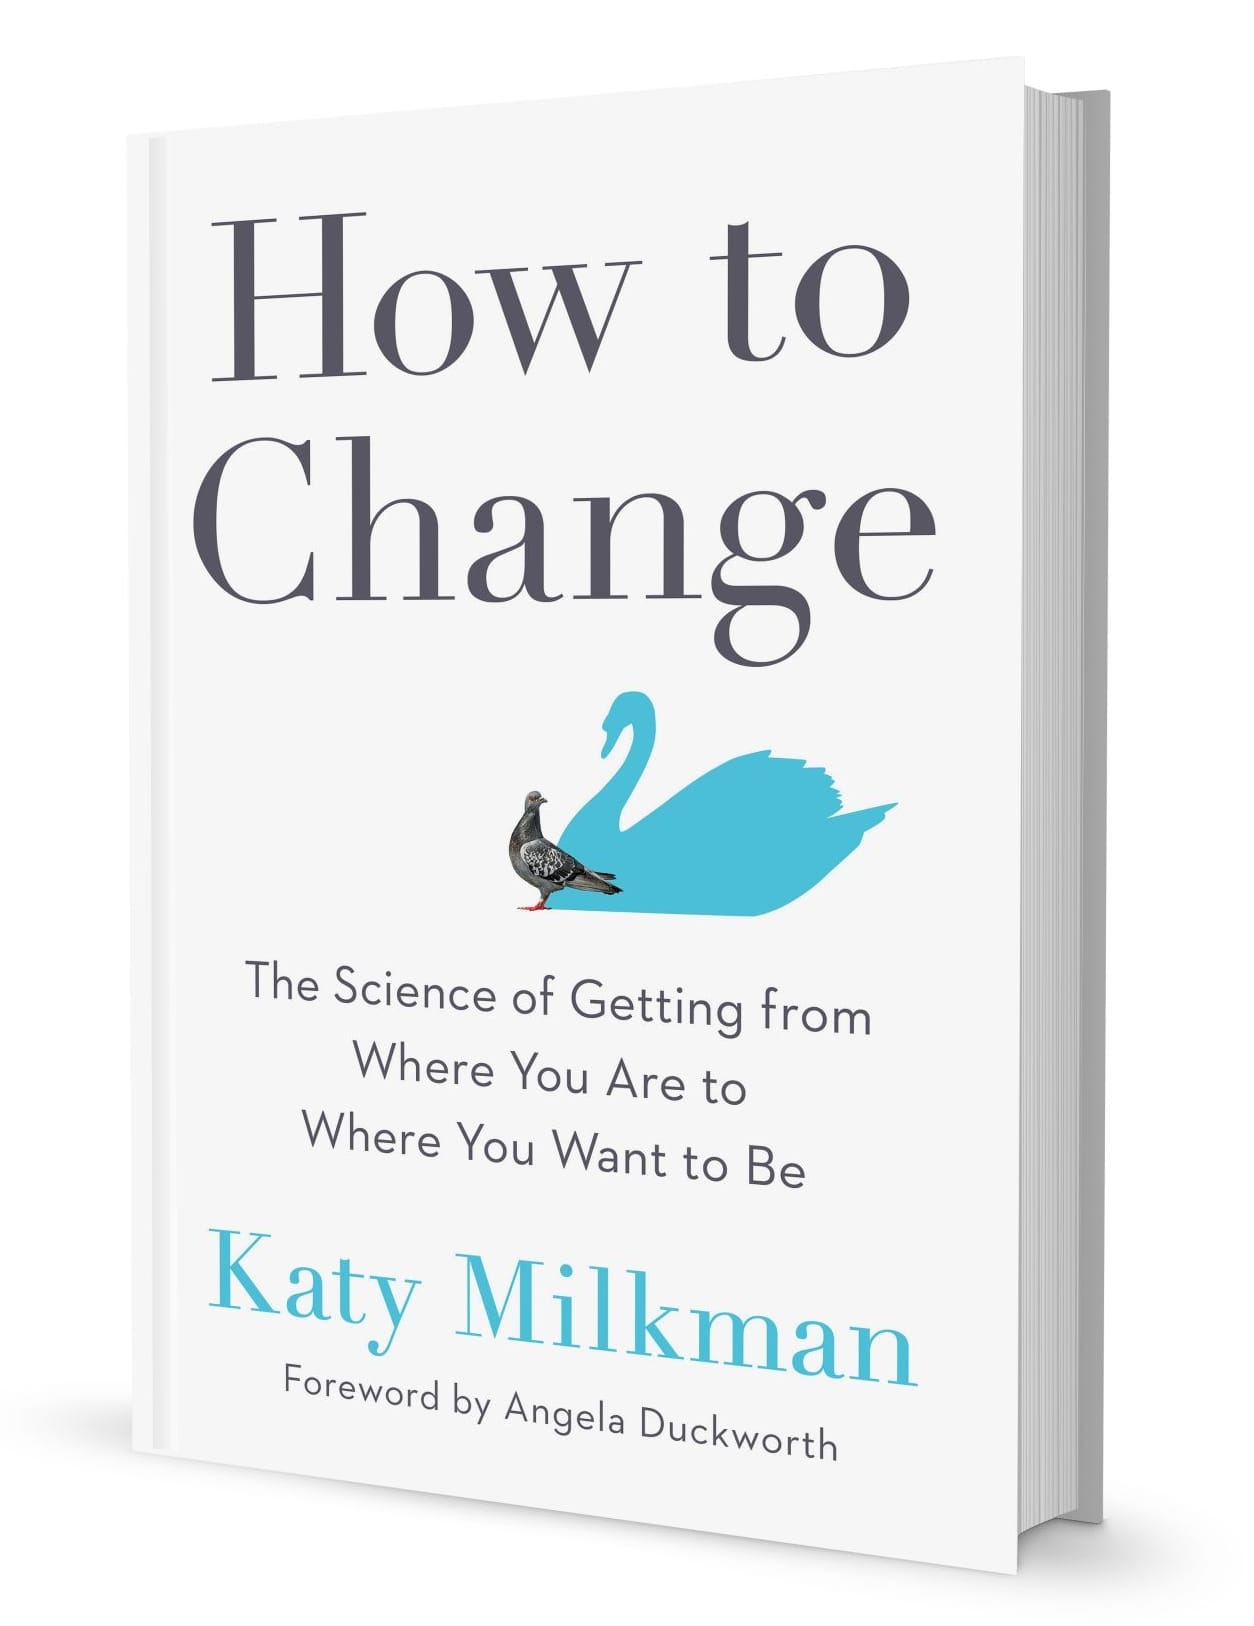 Book titled How to Change.